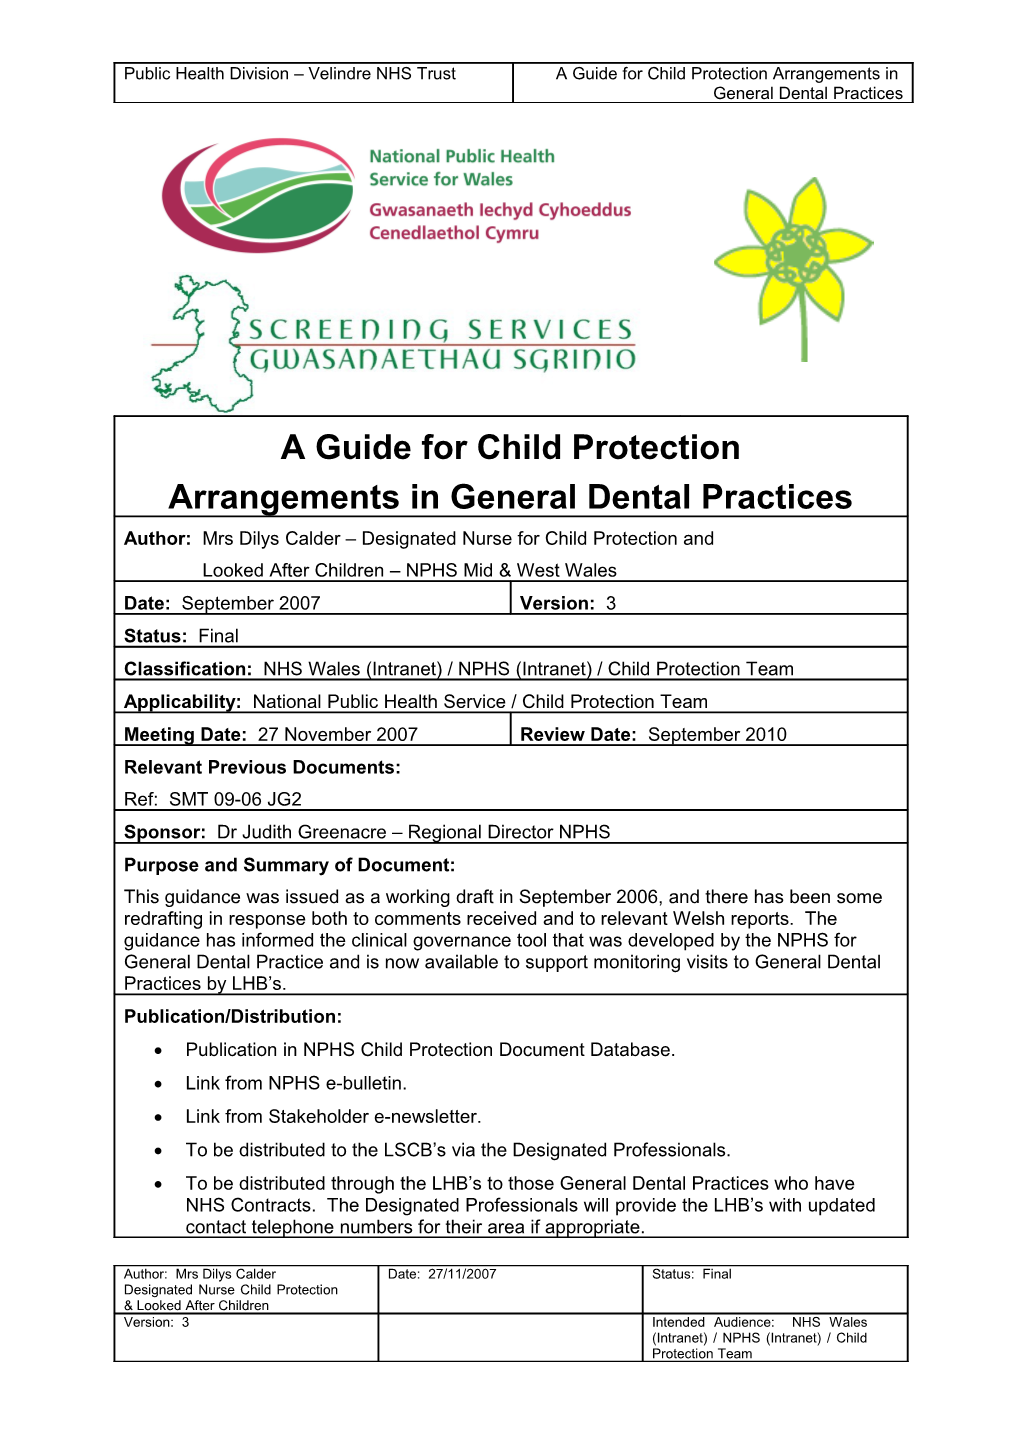 A Guide for Child Protection Arrangements in General Dental Practices